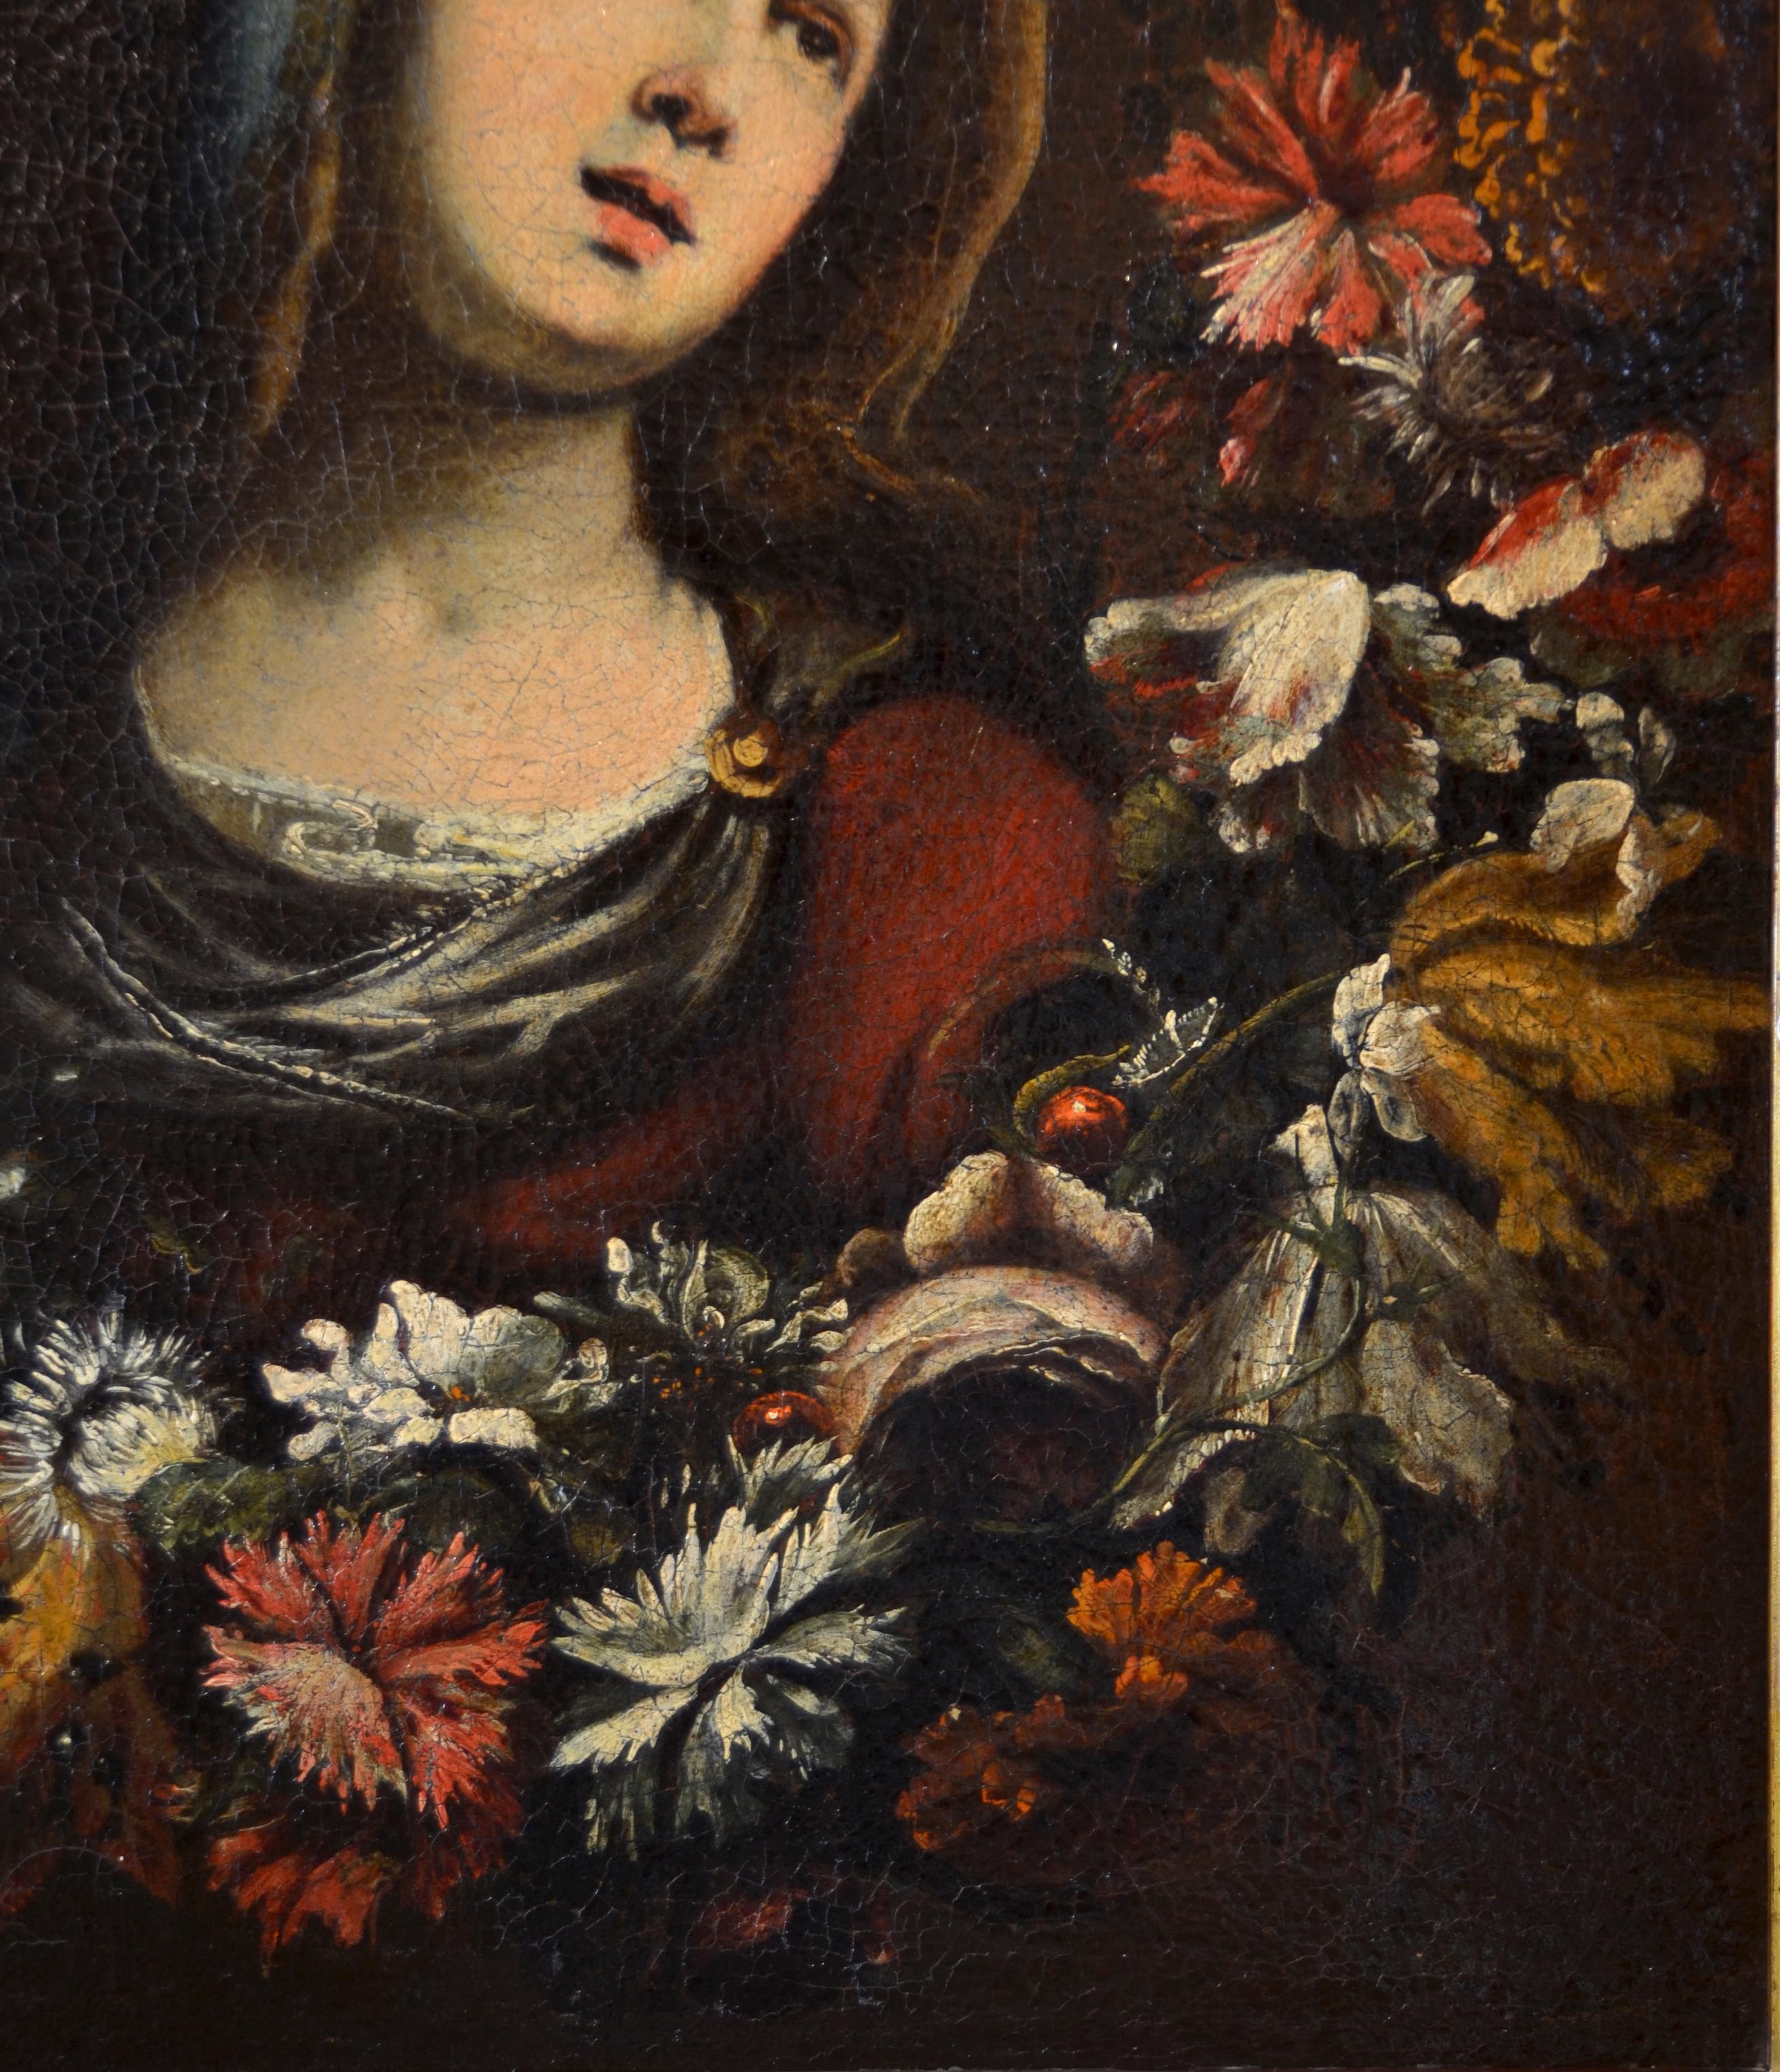 Flower Garland Virgin Paint Oil on canvas Old master 17th Century Italy For Sale 2